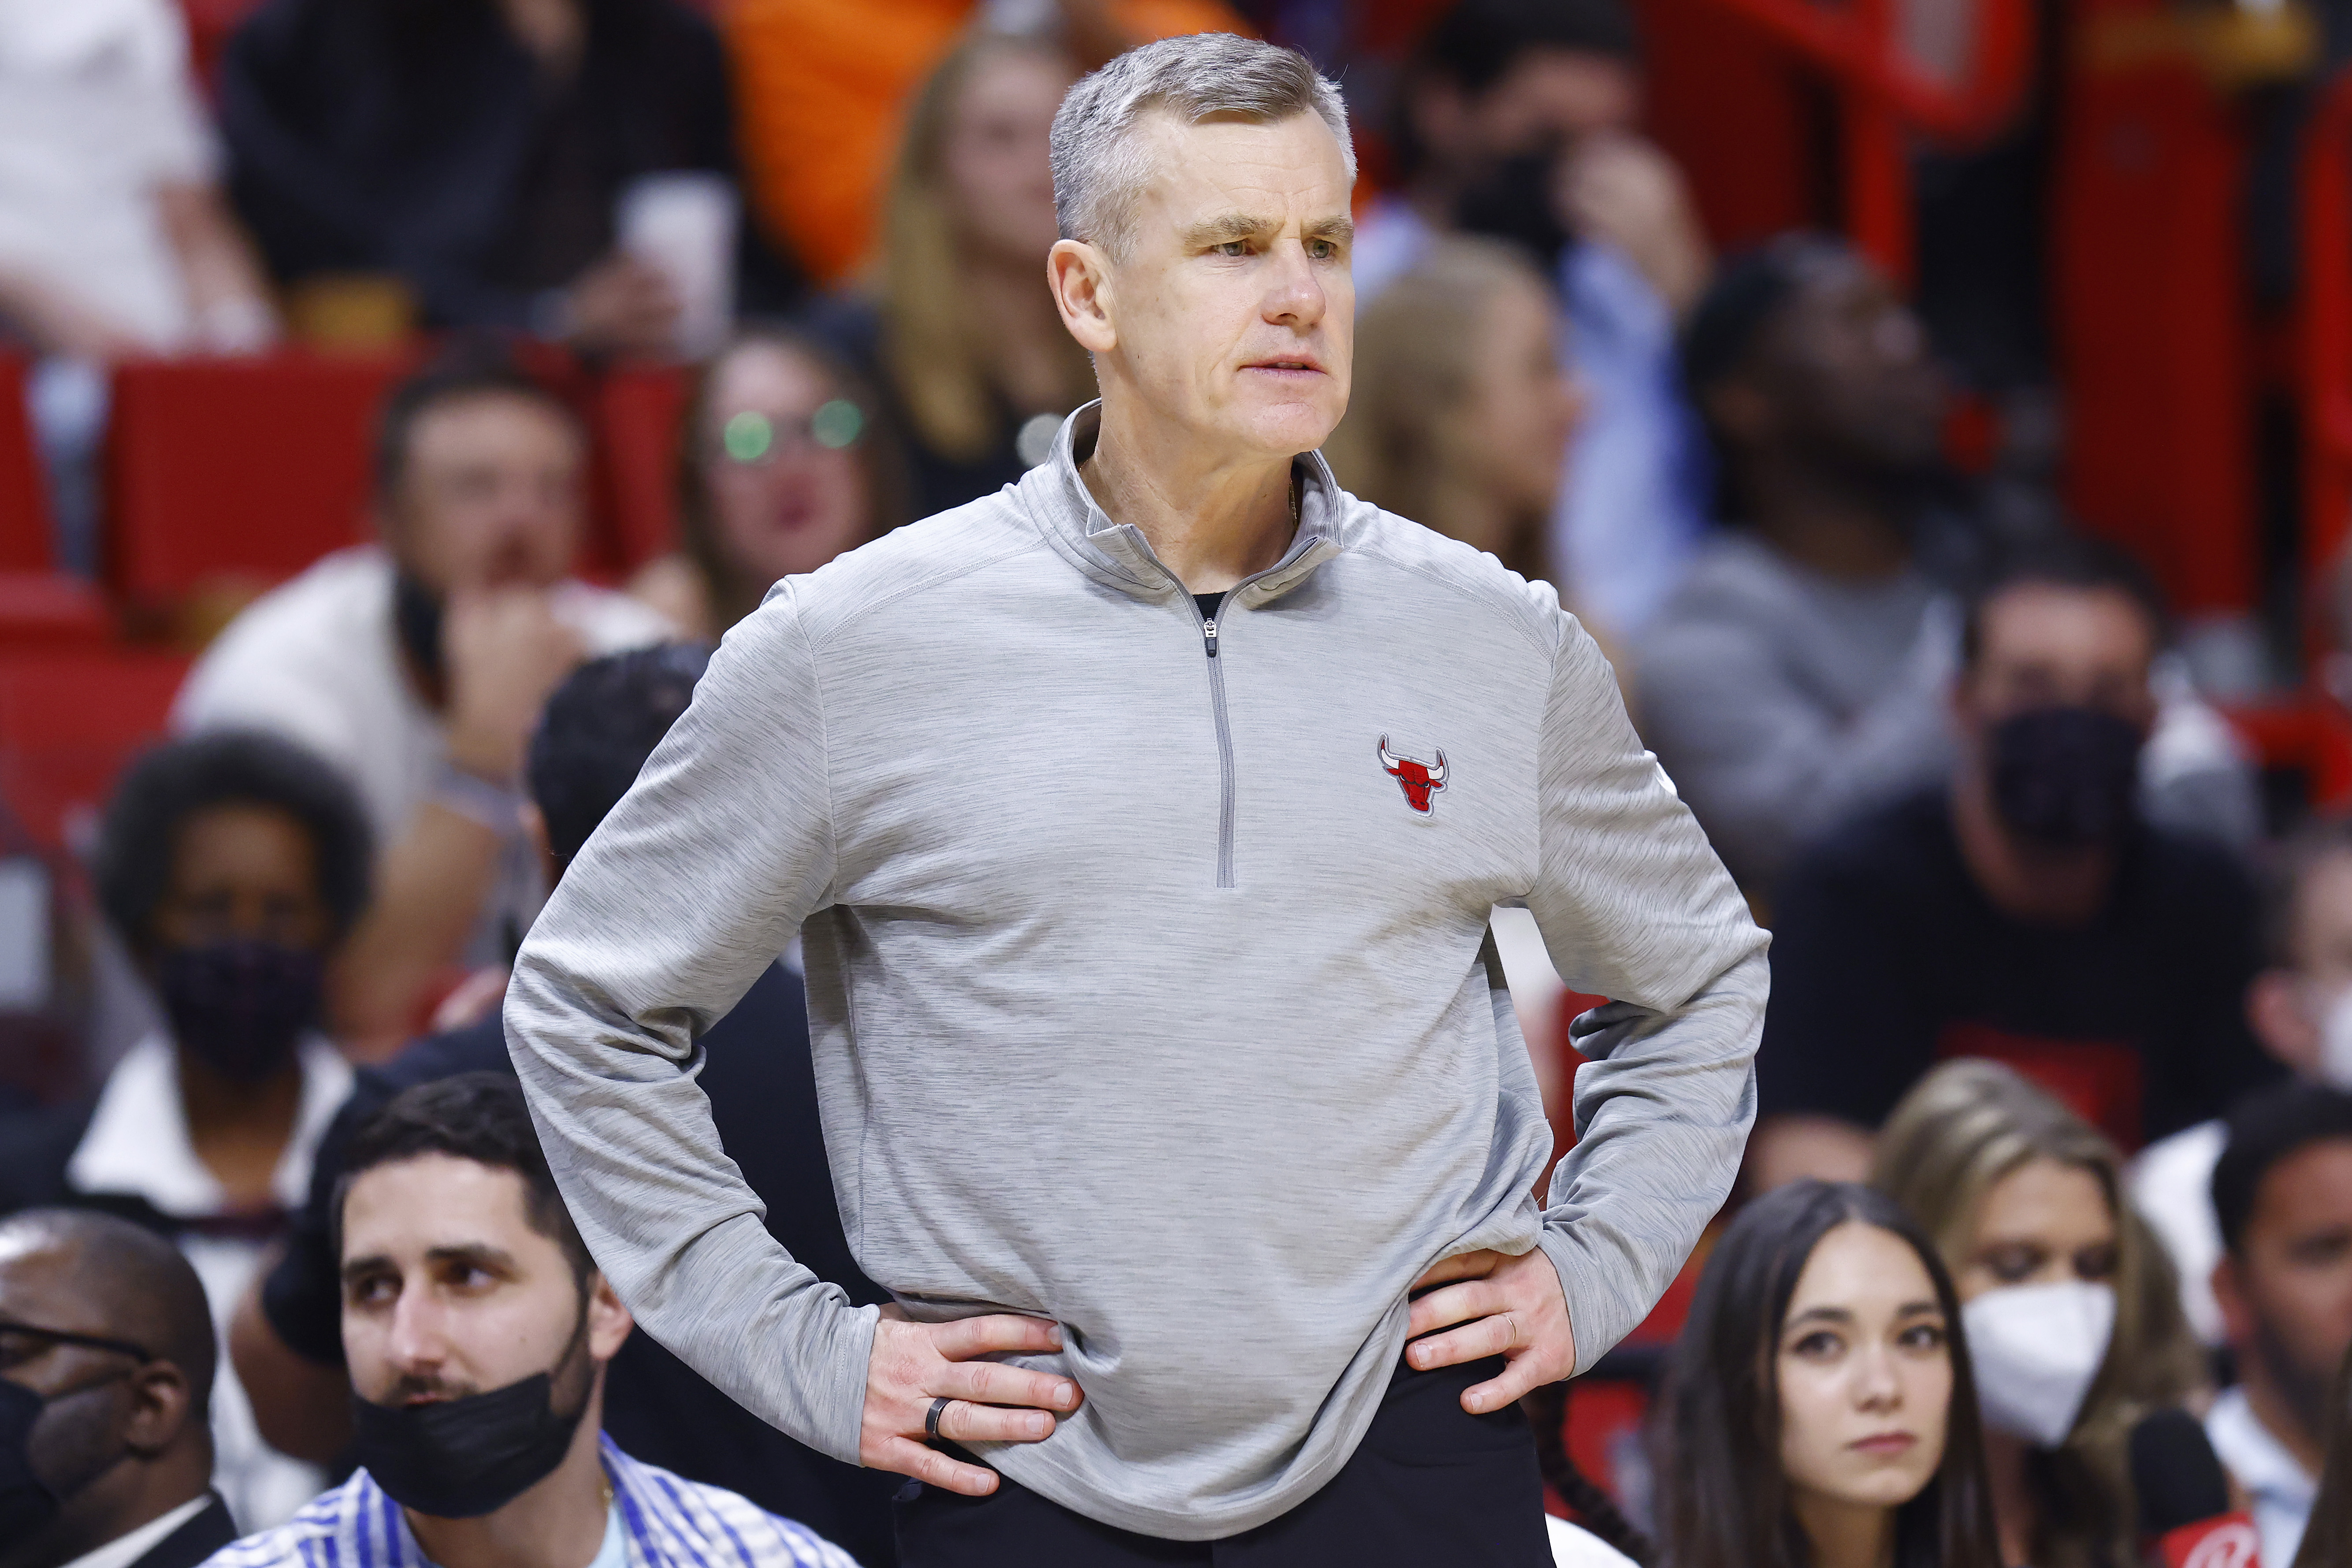 Chicago Bulls coach Billy Donovan enters NBA's health and safety